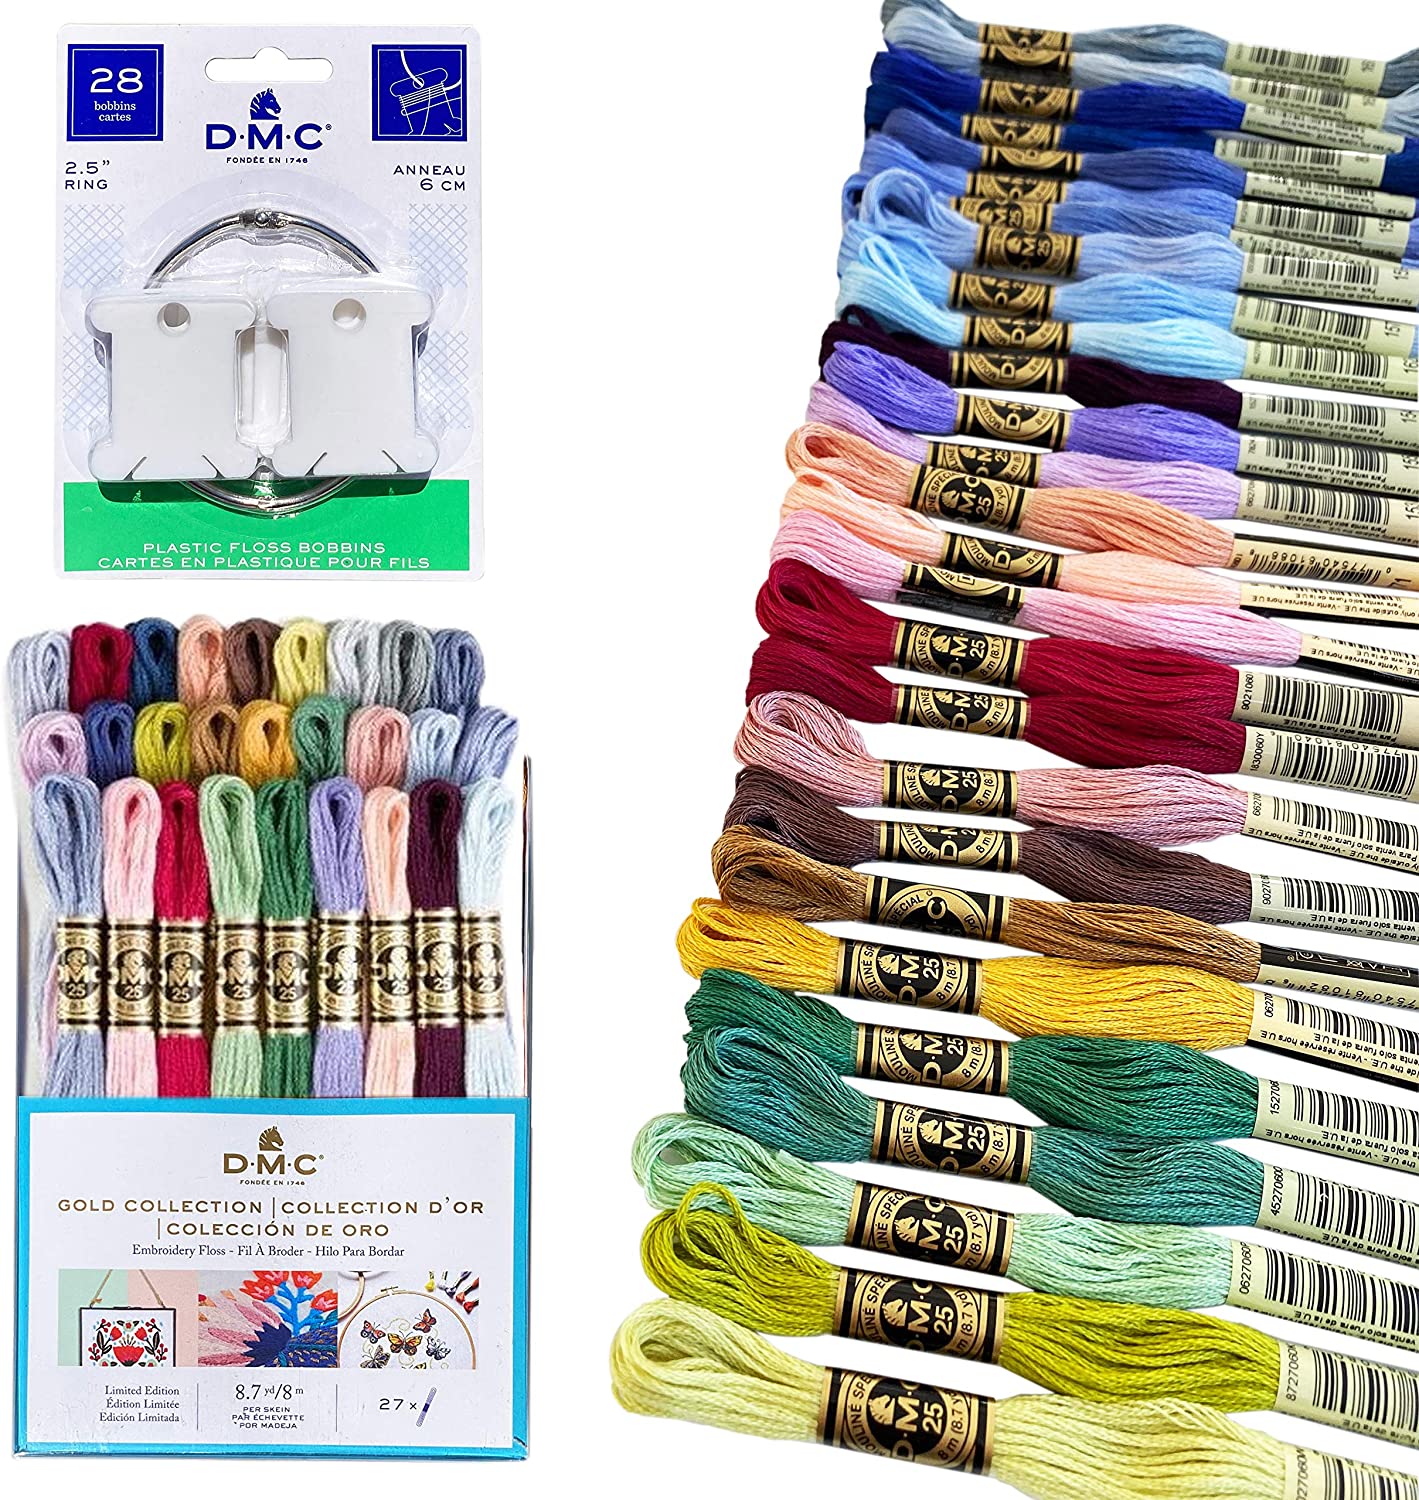 DMC Embroidery Floss Pack,Colorful Holiday Collection,DMC Embroidery Thread, Kit Include 30 Cotton Assorted Color Bundle with DMC Cross Stitch Hand